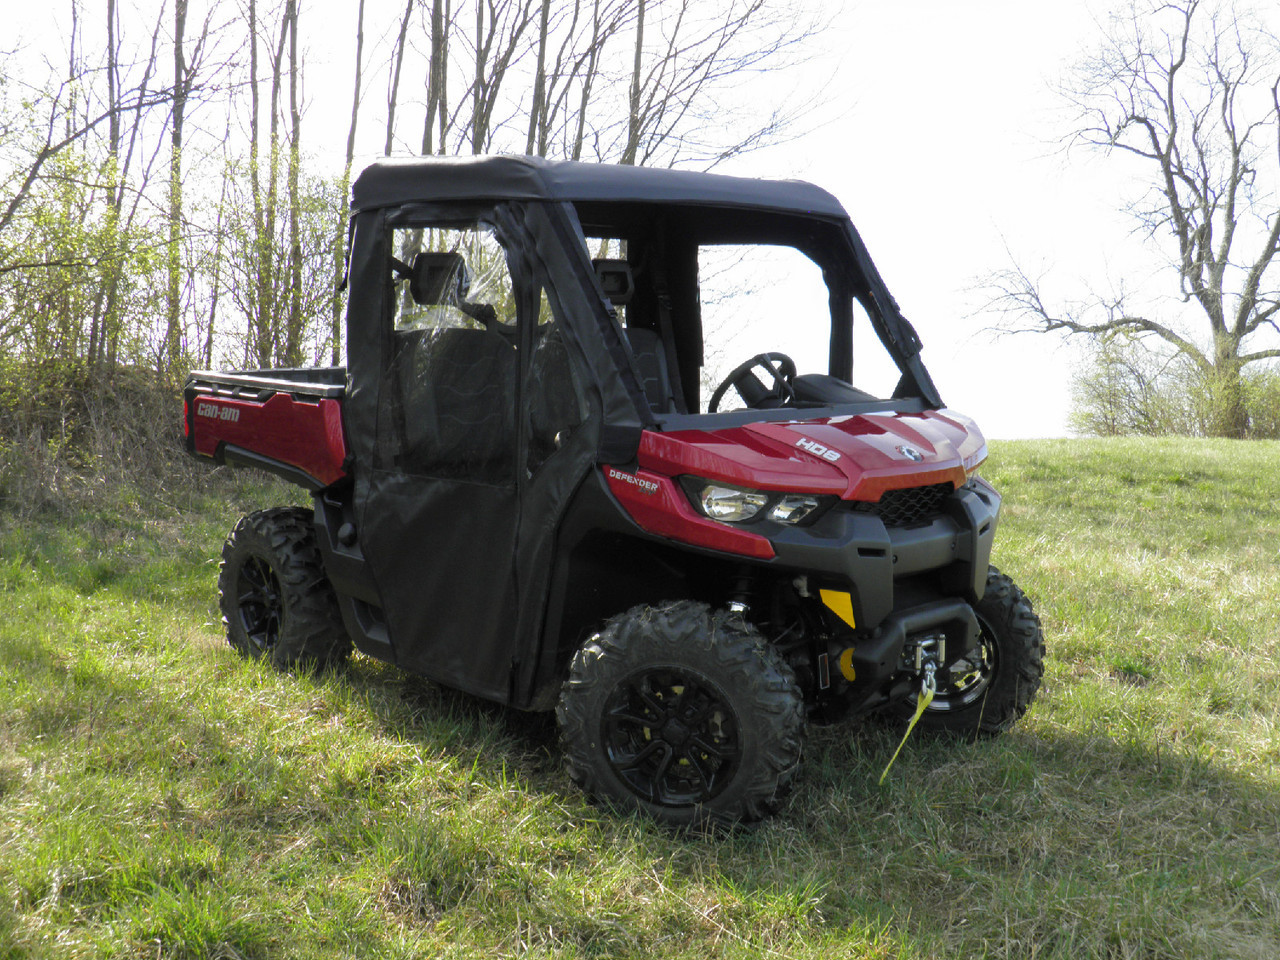 3 Star side x side can-am defender doors and rear window front and side angle view